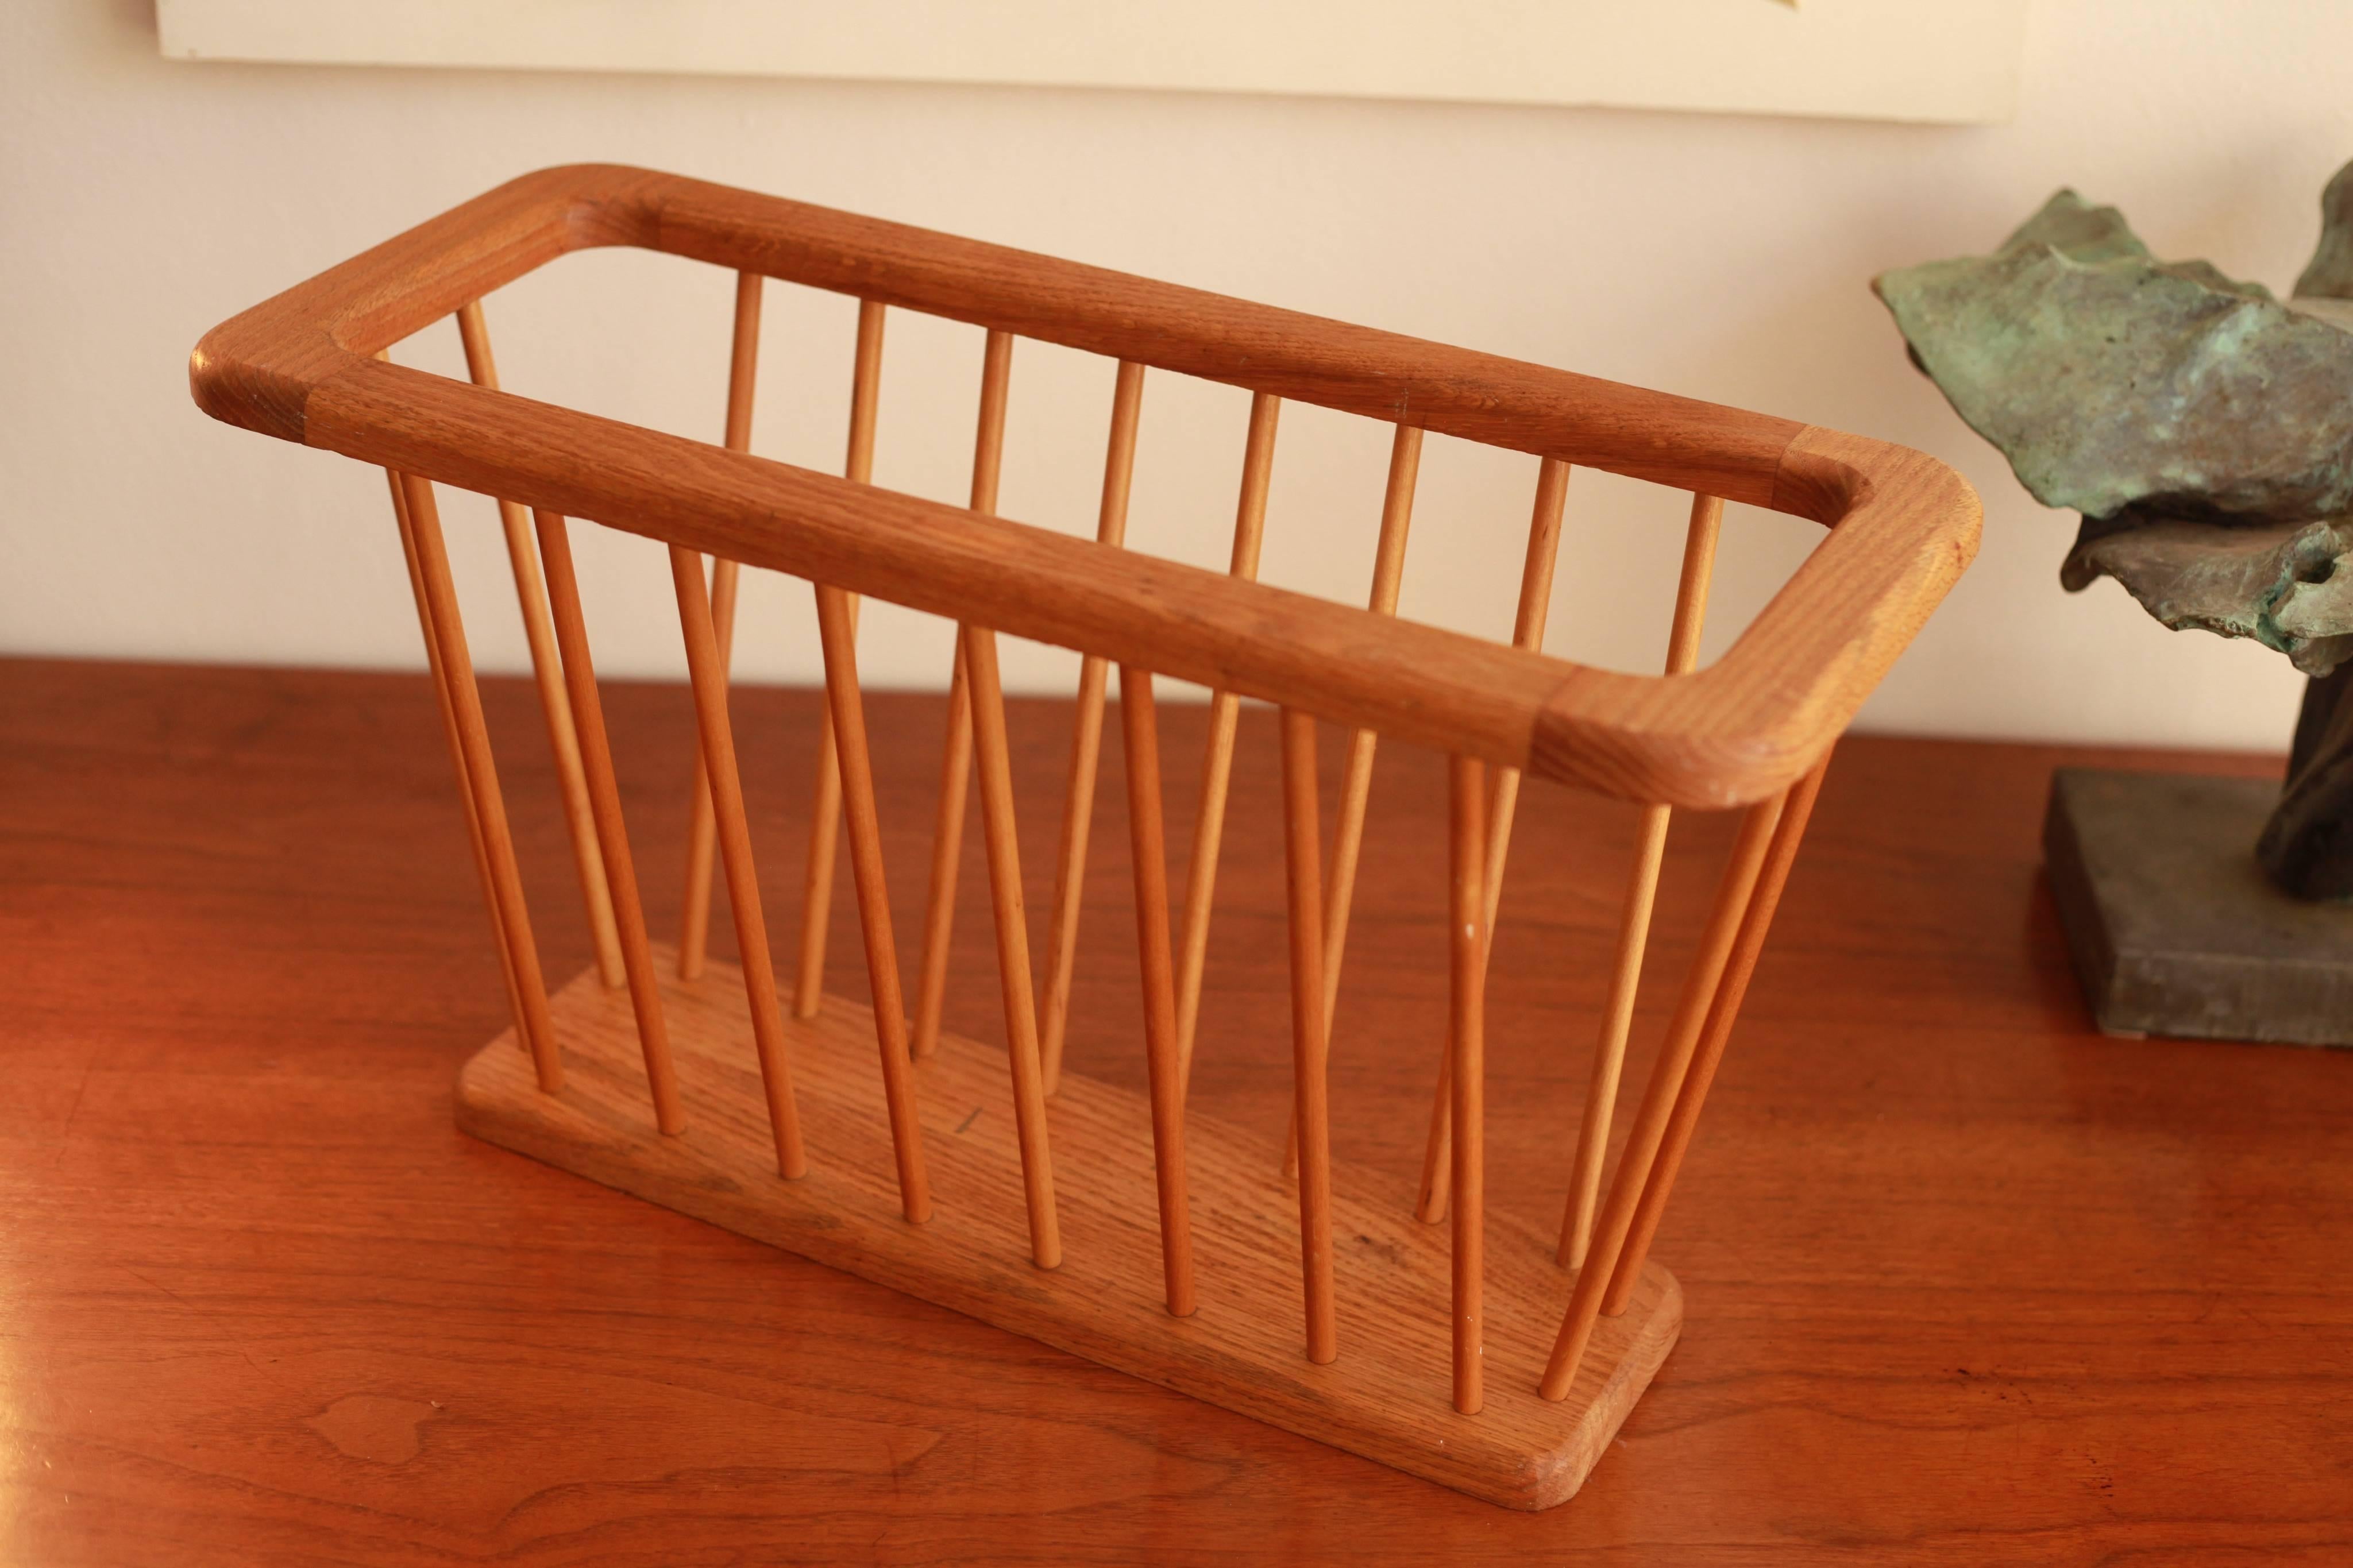 Danish Modern magazine holder constructed with 20 solid oak spindles.